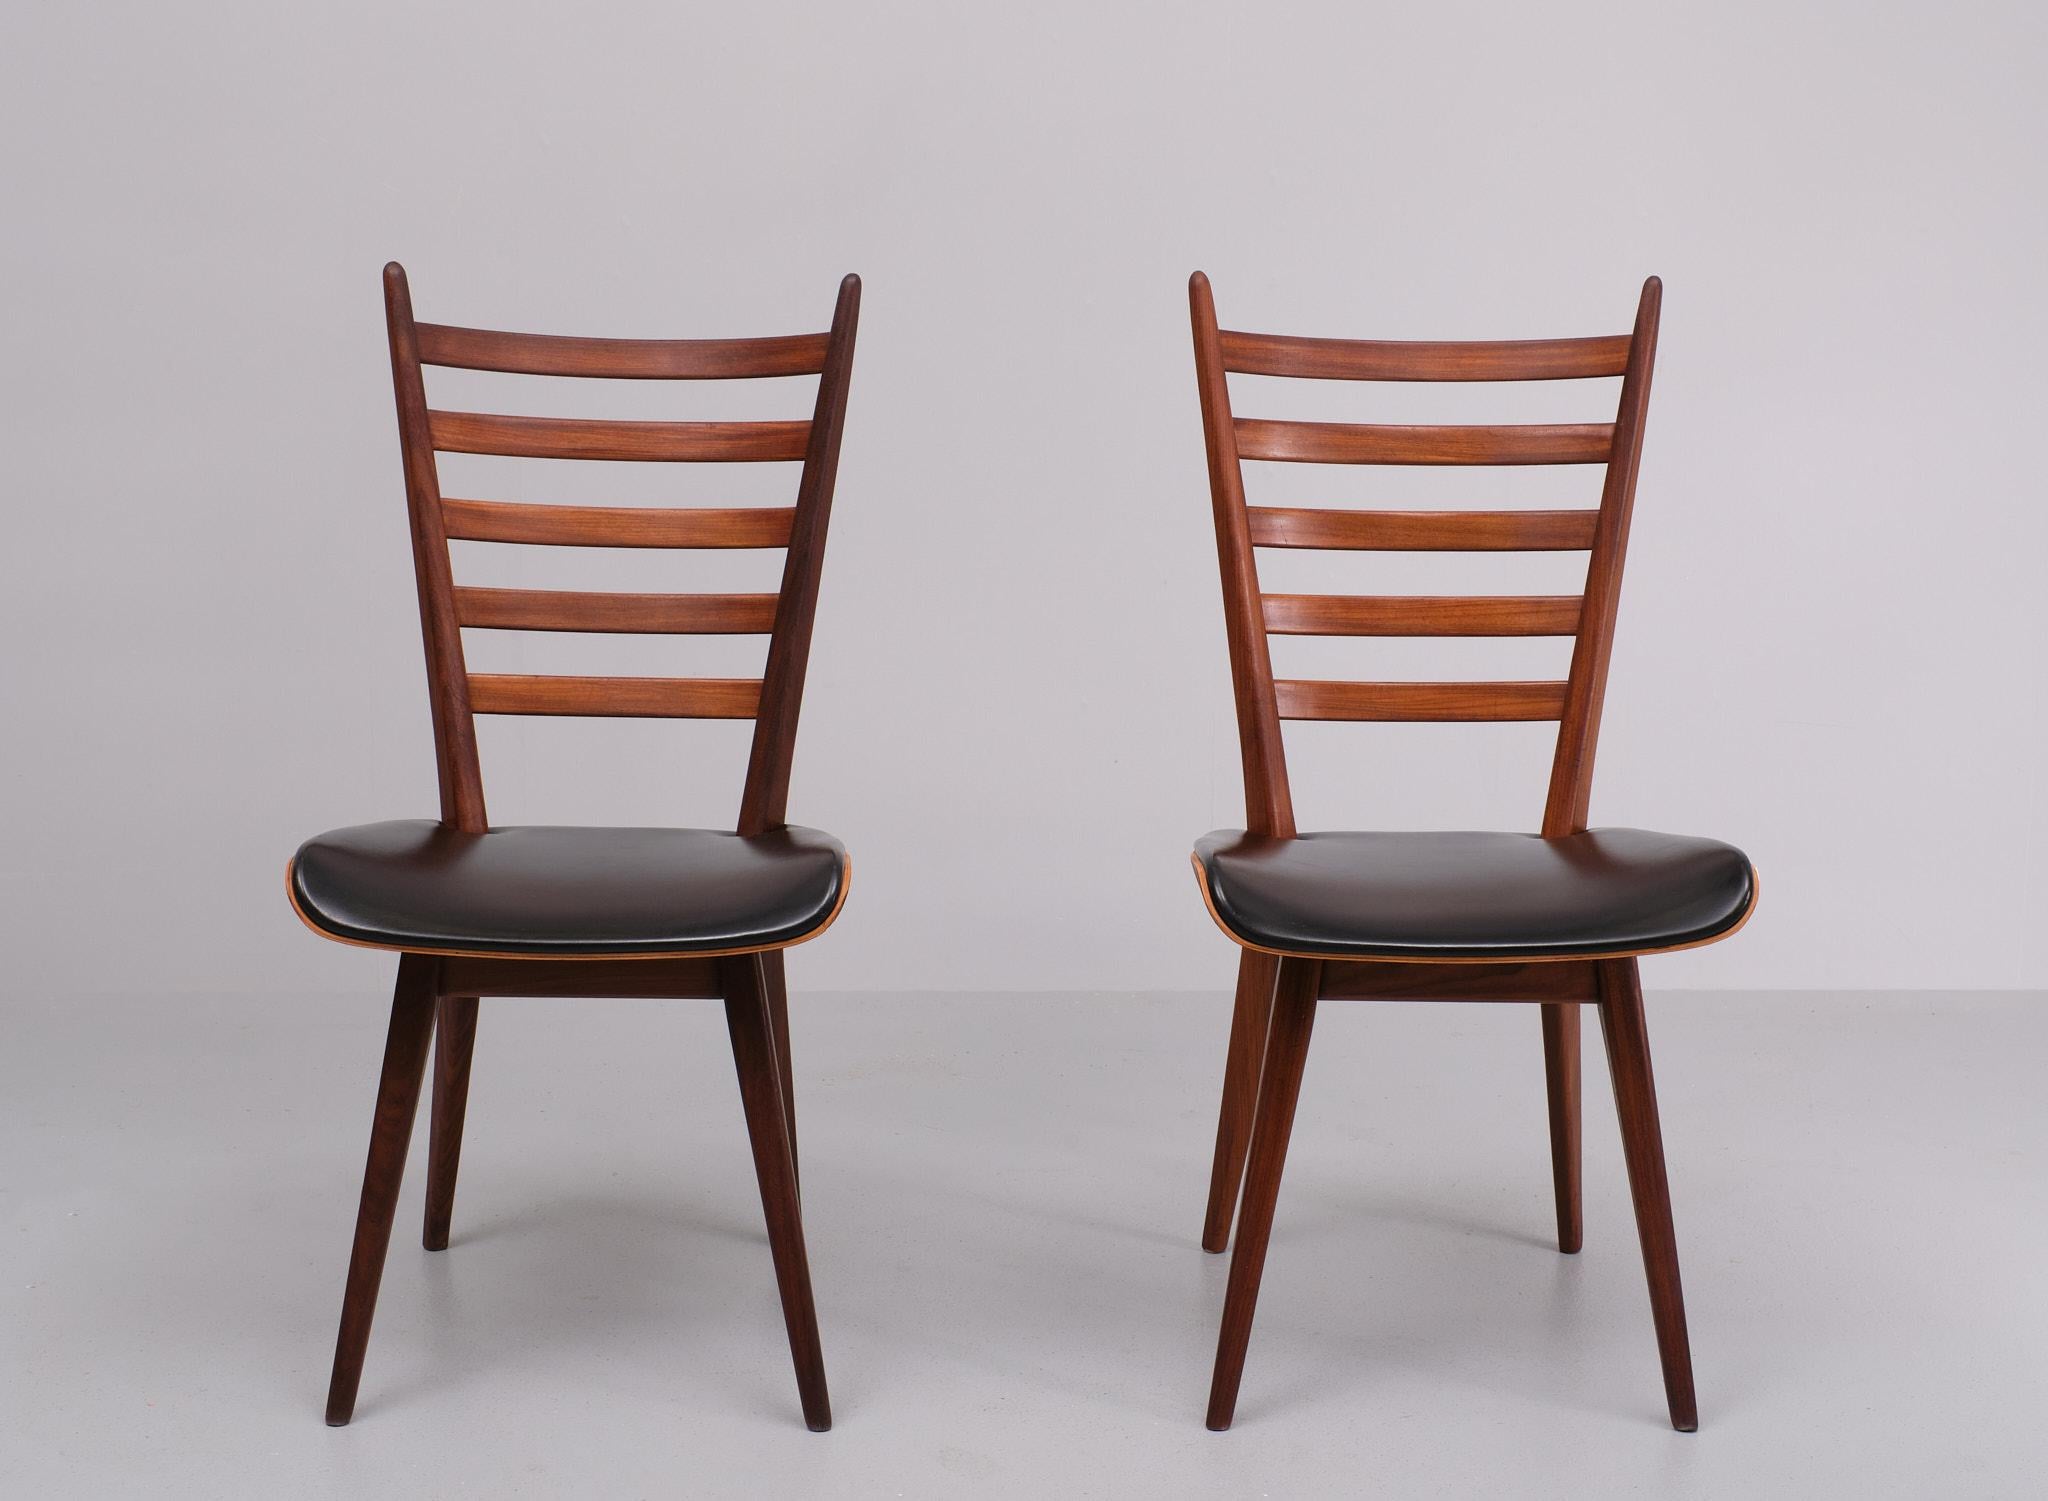 Cees Braakman  curved ladder chairs 1950s  Holland  In Good Condition For Sale In Den Haag, NL